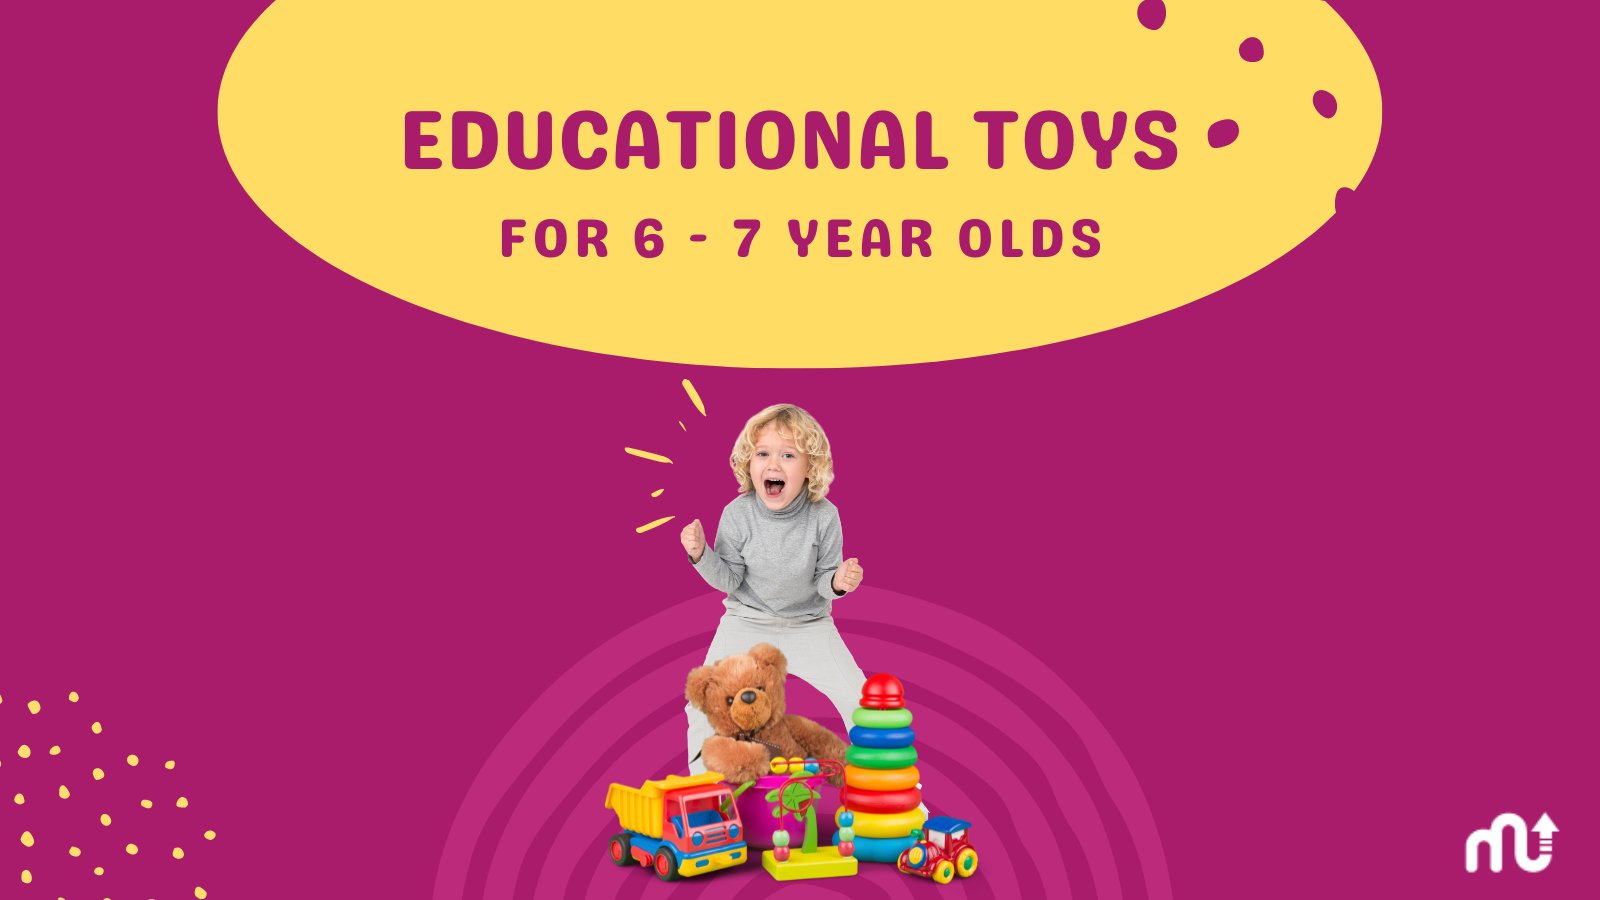 Top 24 Educational Toys for 6-7 Year Olds - MentalUP